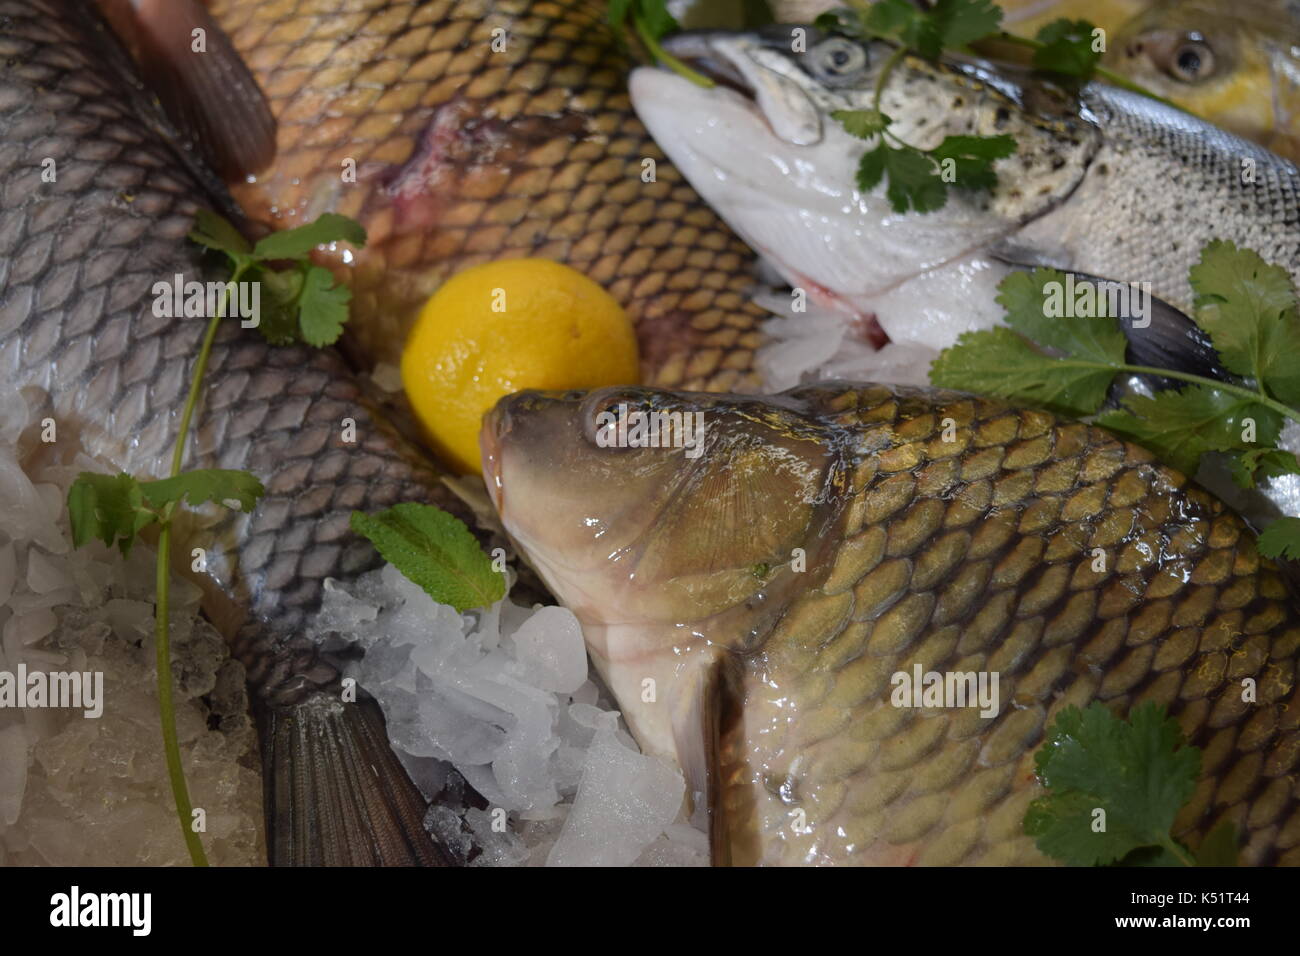 Raw fish with ice at market Stock Photo